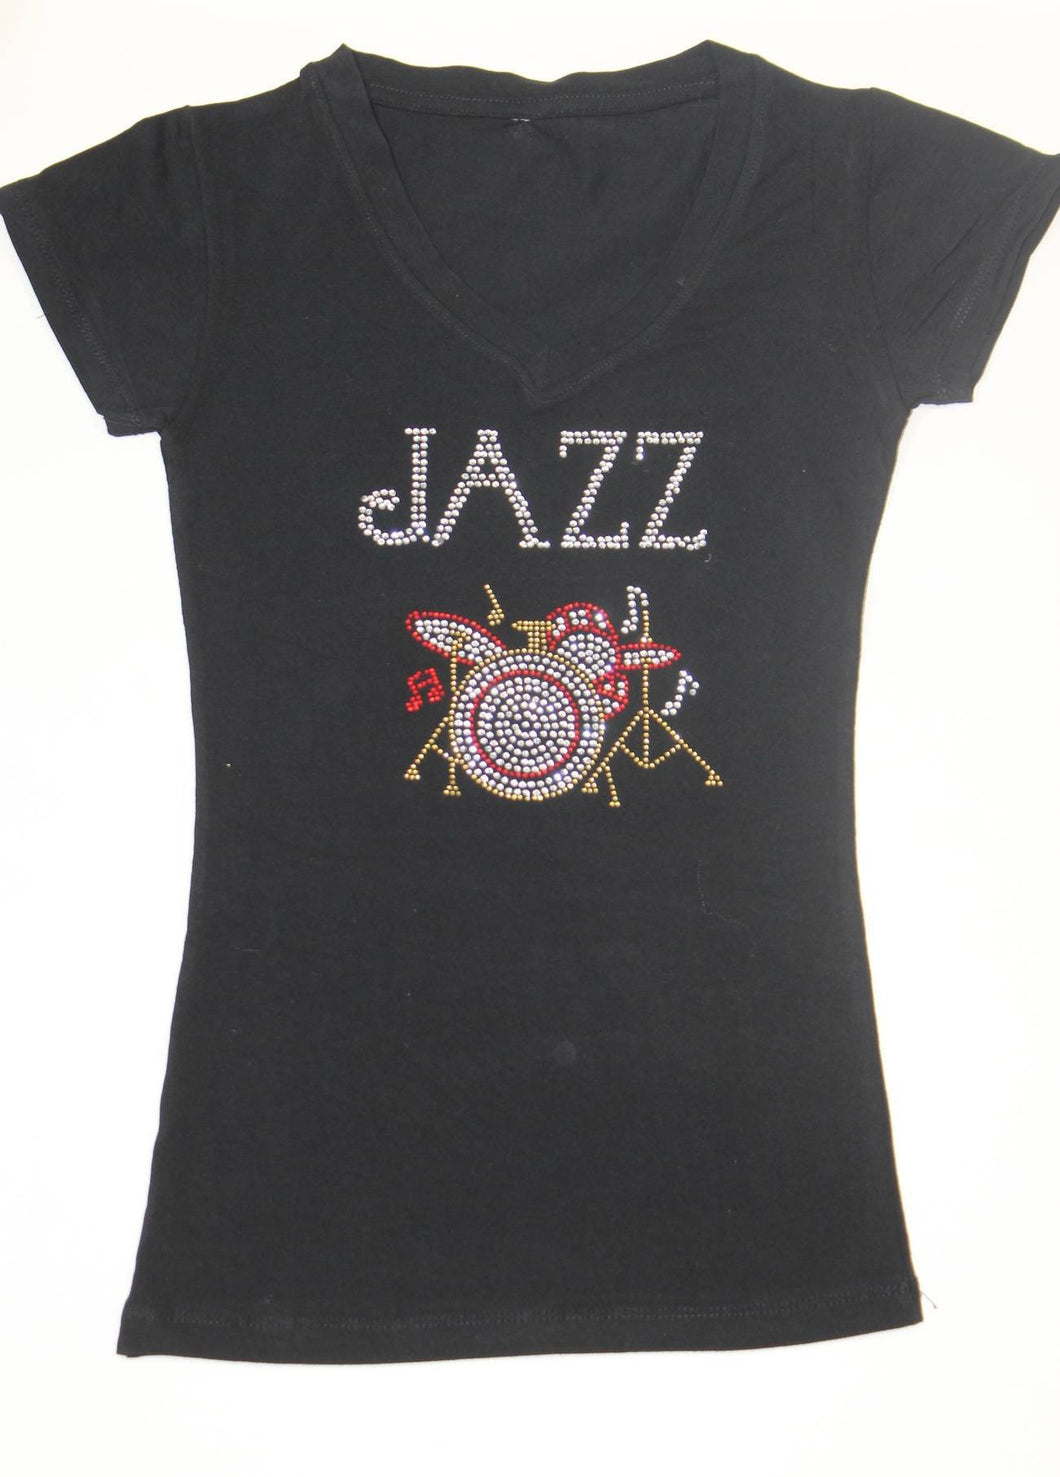 JAZZ with Drums and Music Notes Rhinestone